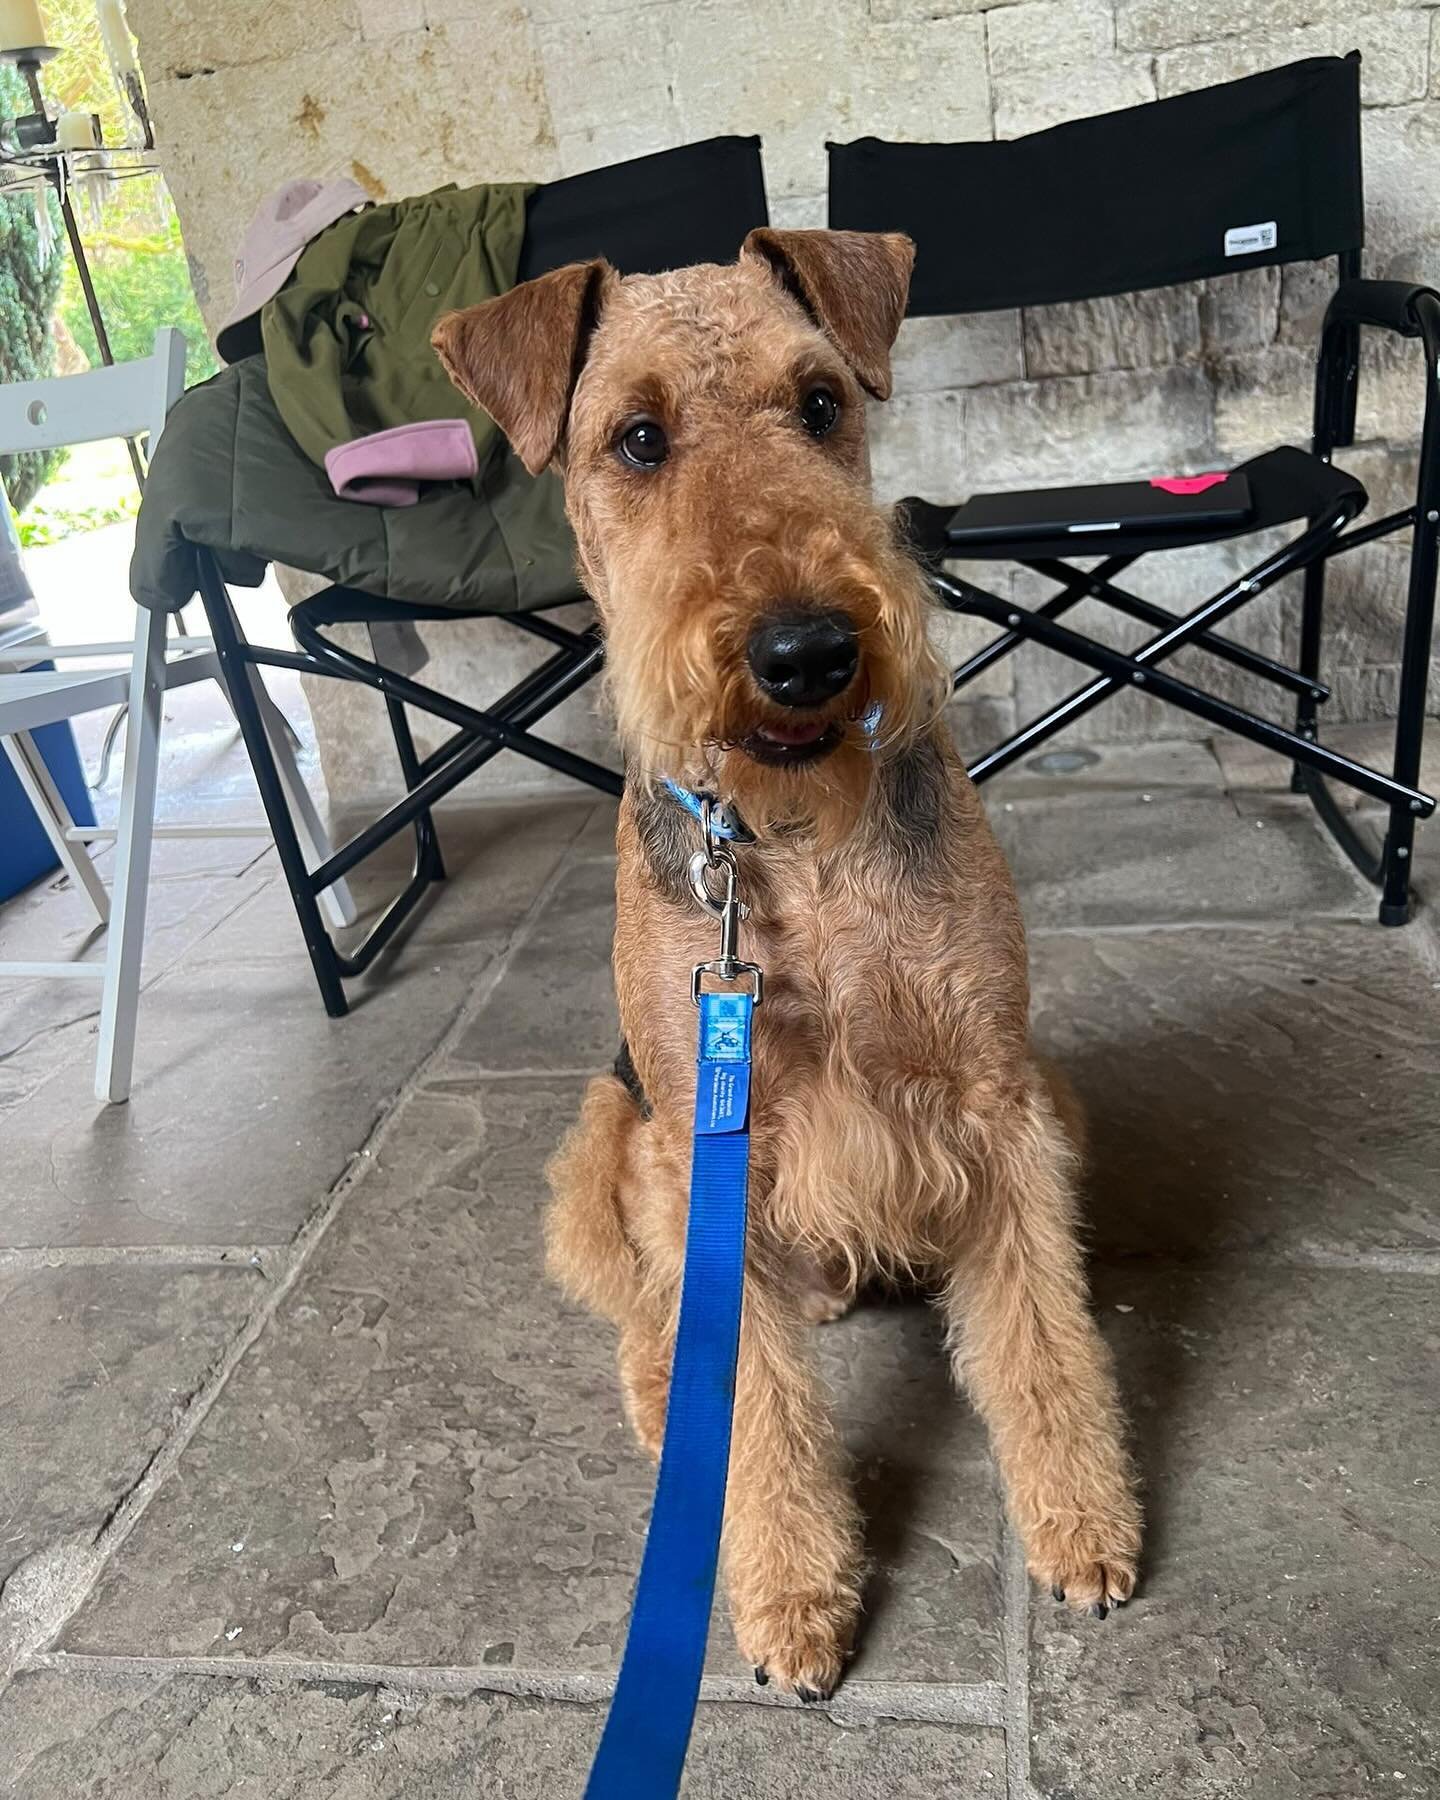 Also on set today, the incredibly beautiful Hans. 
#onset #onlocation #fashionshoot #airedale #airedaleterrier